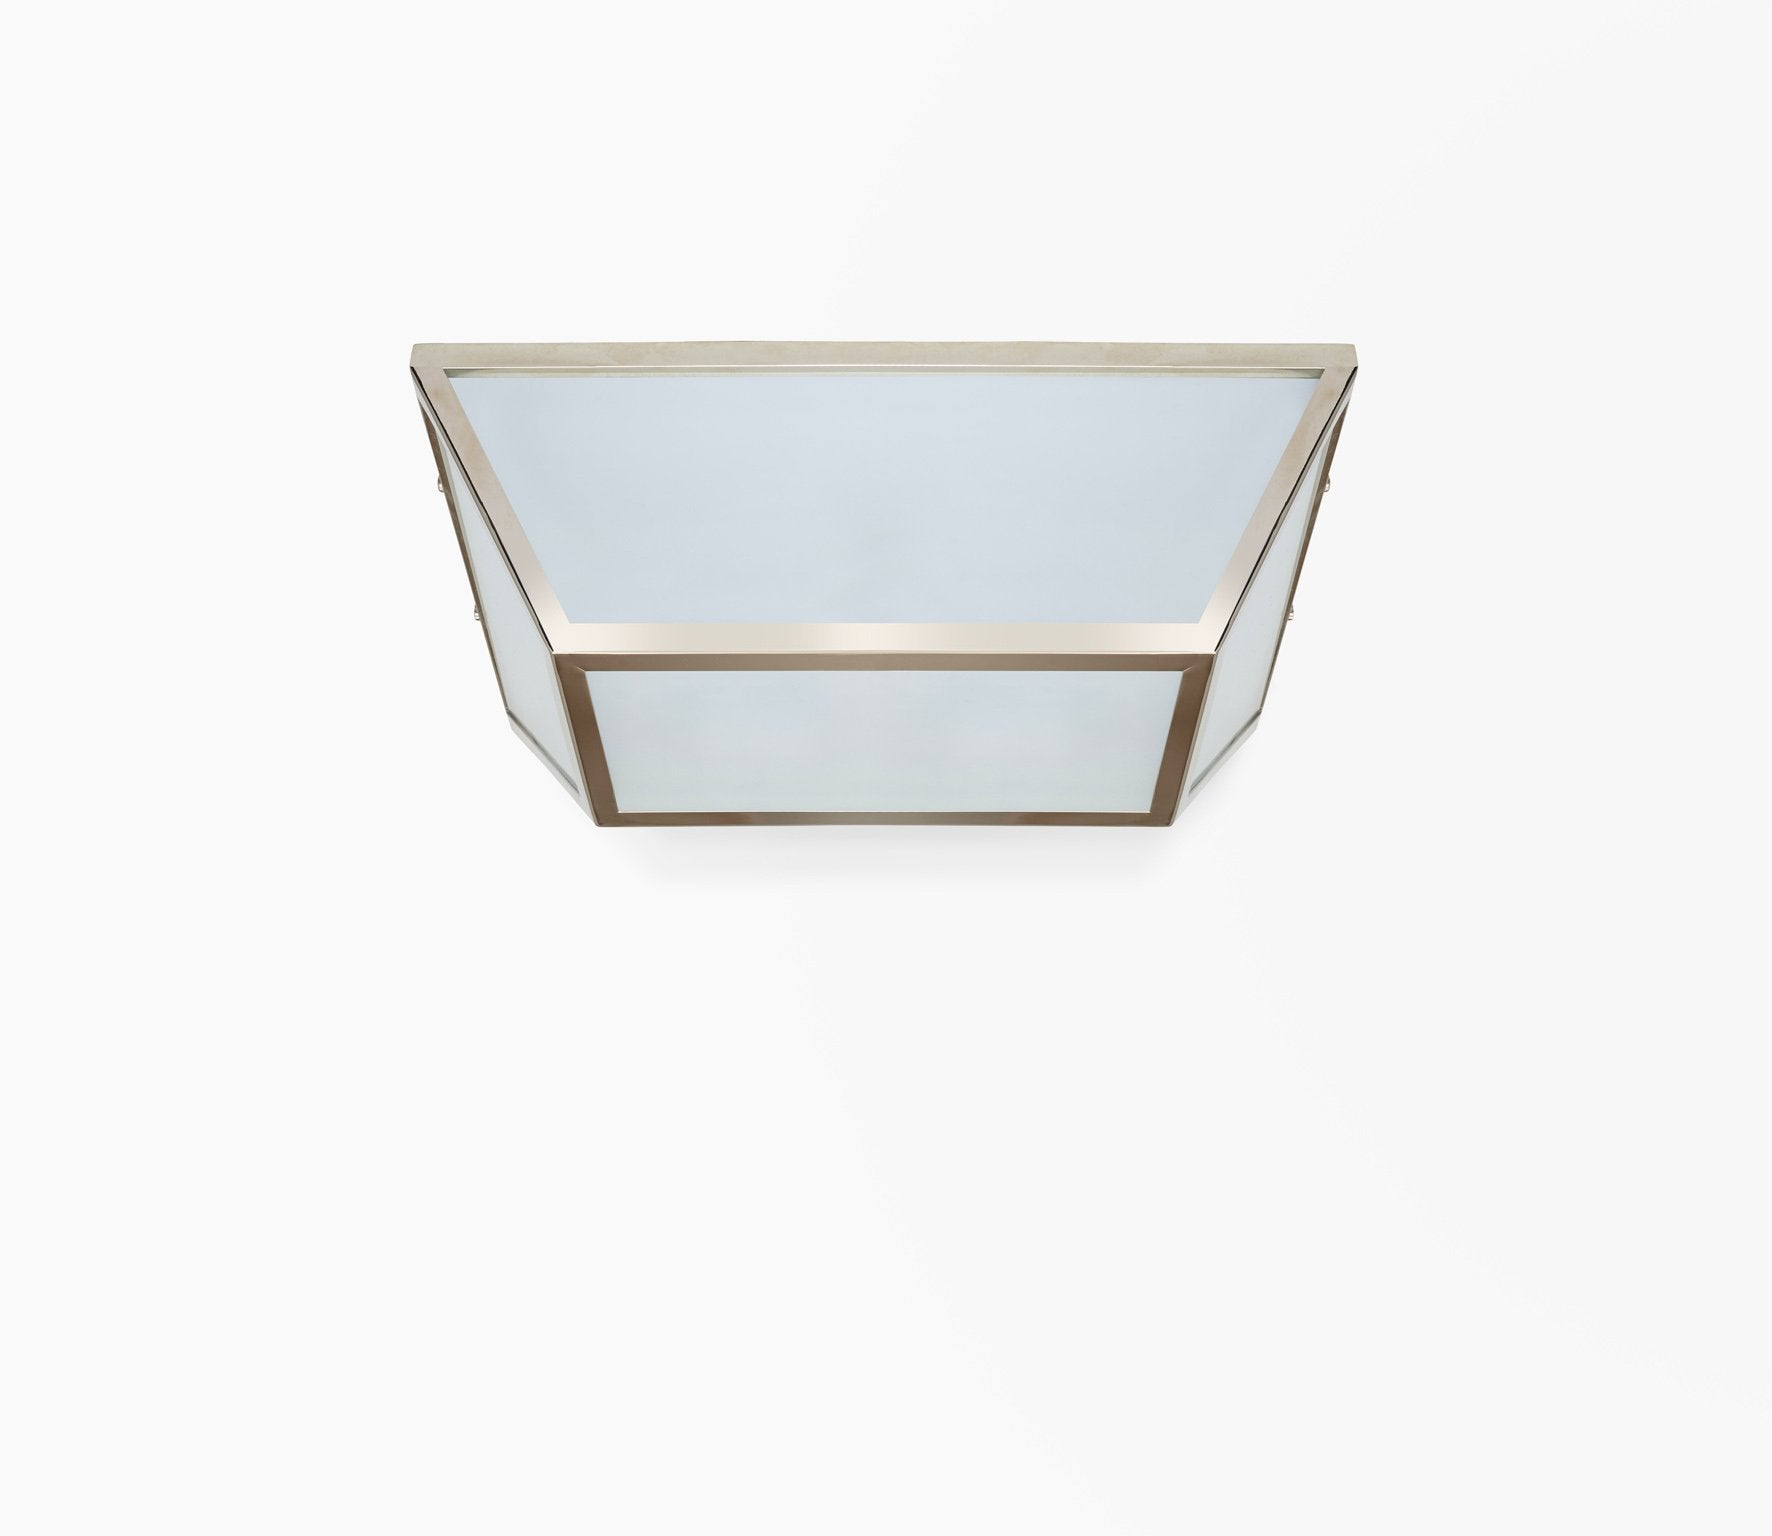 Strand Ceiling Light Product Image 4